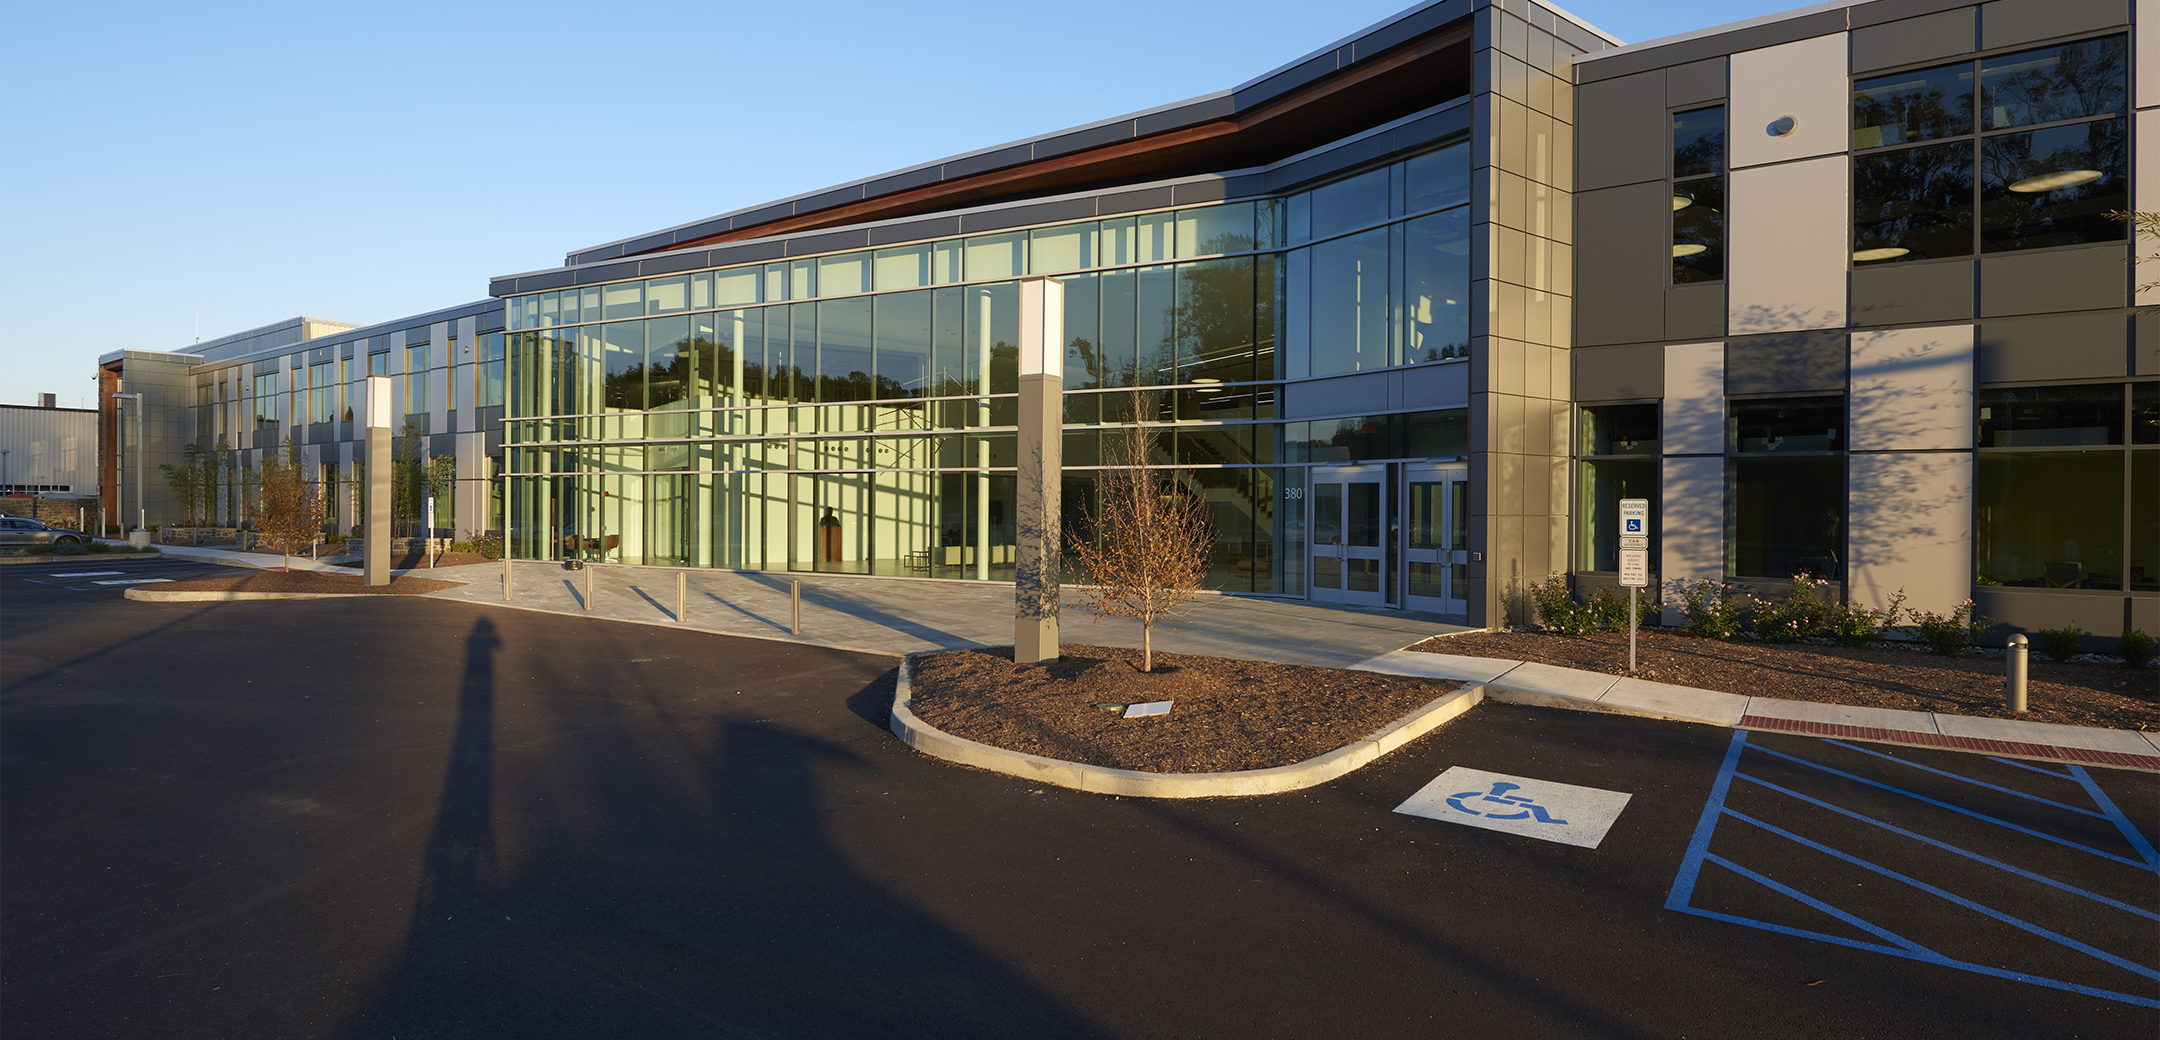 Sunoco headquarters, a two story, modern building featuring a large glass panel wall lobby entrance and front parking lot.